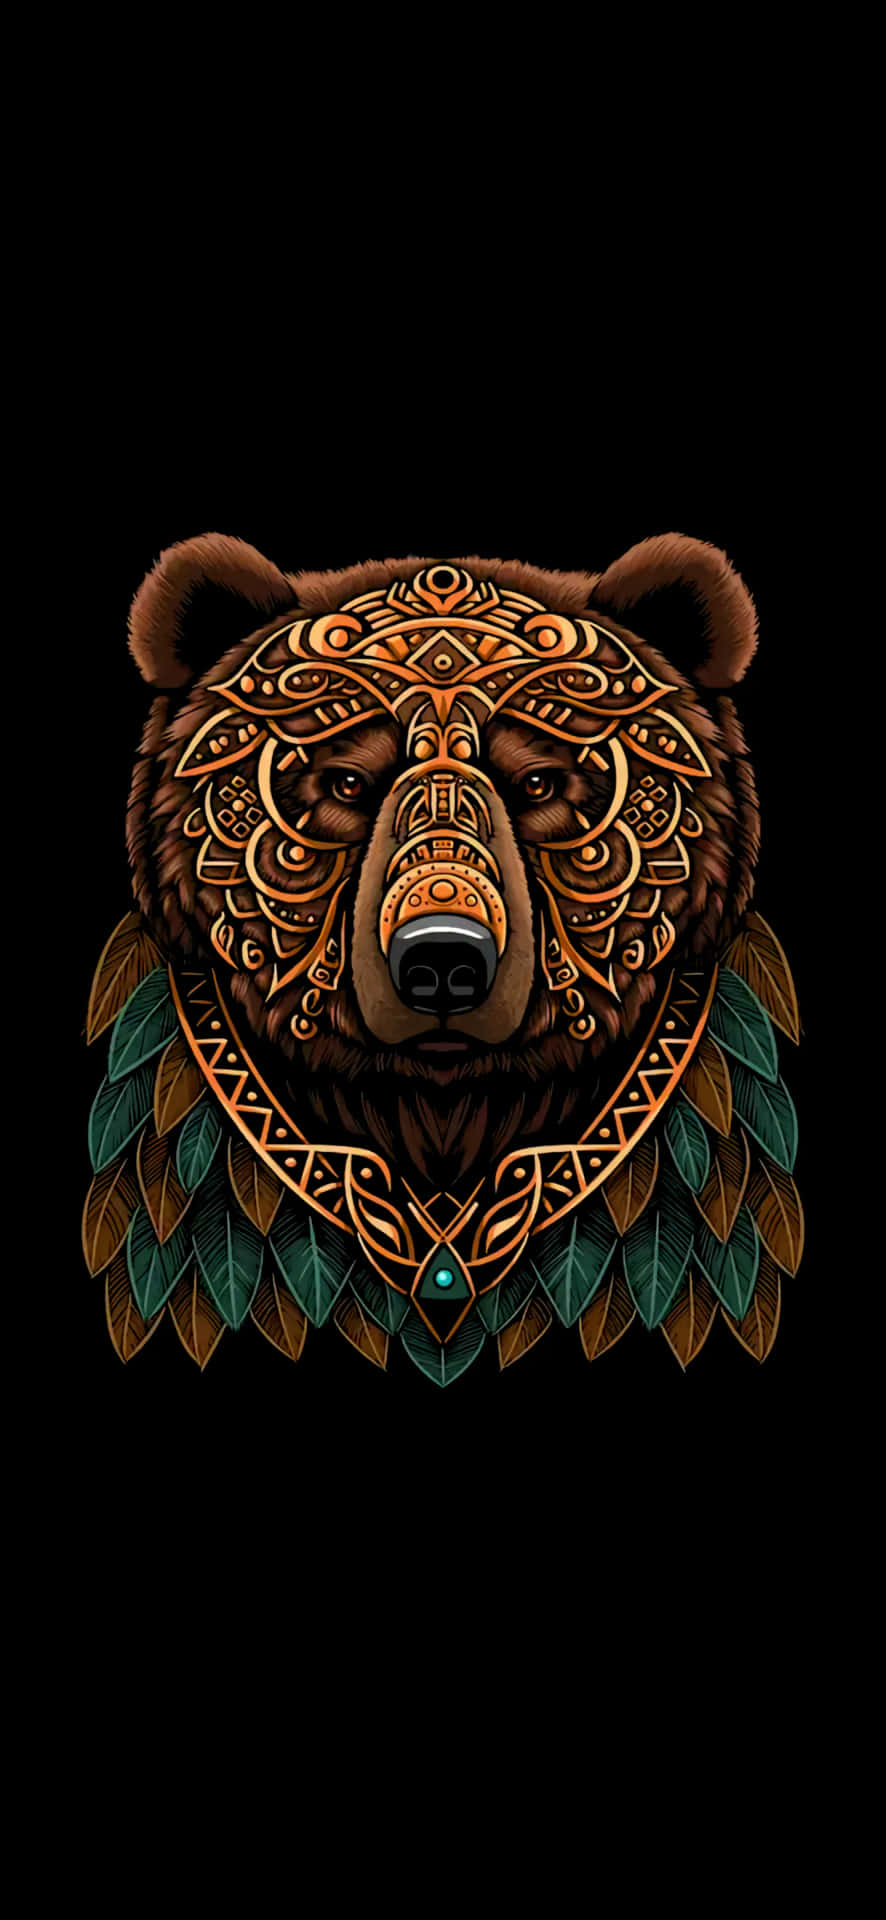 Tribal Grizzly Bear Artwork Background